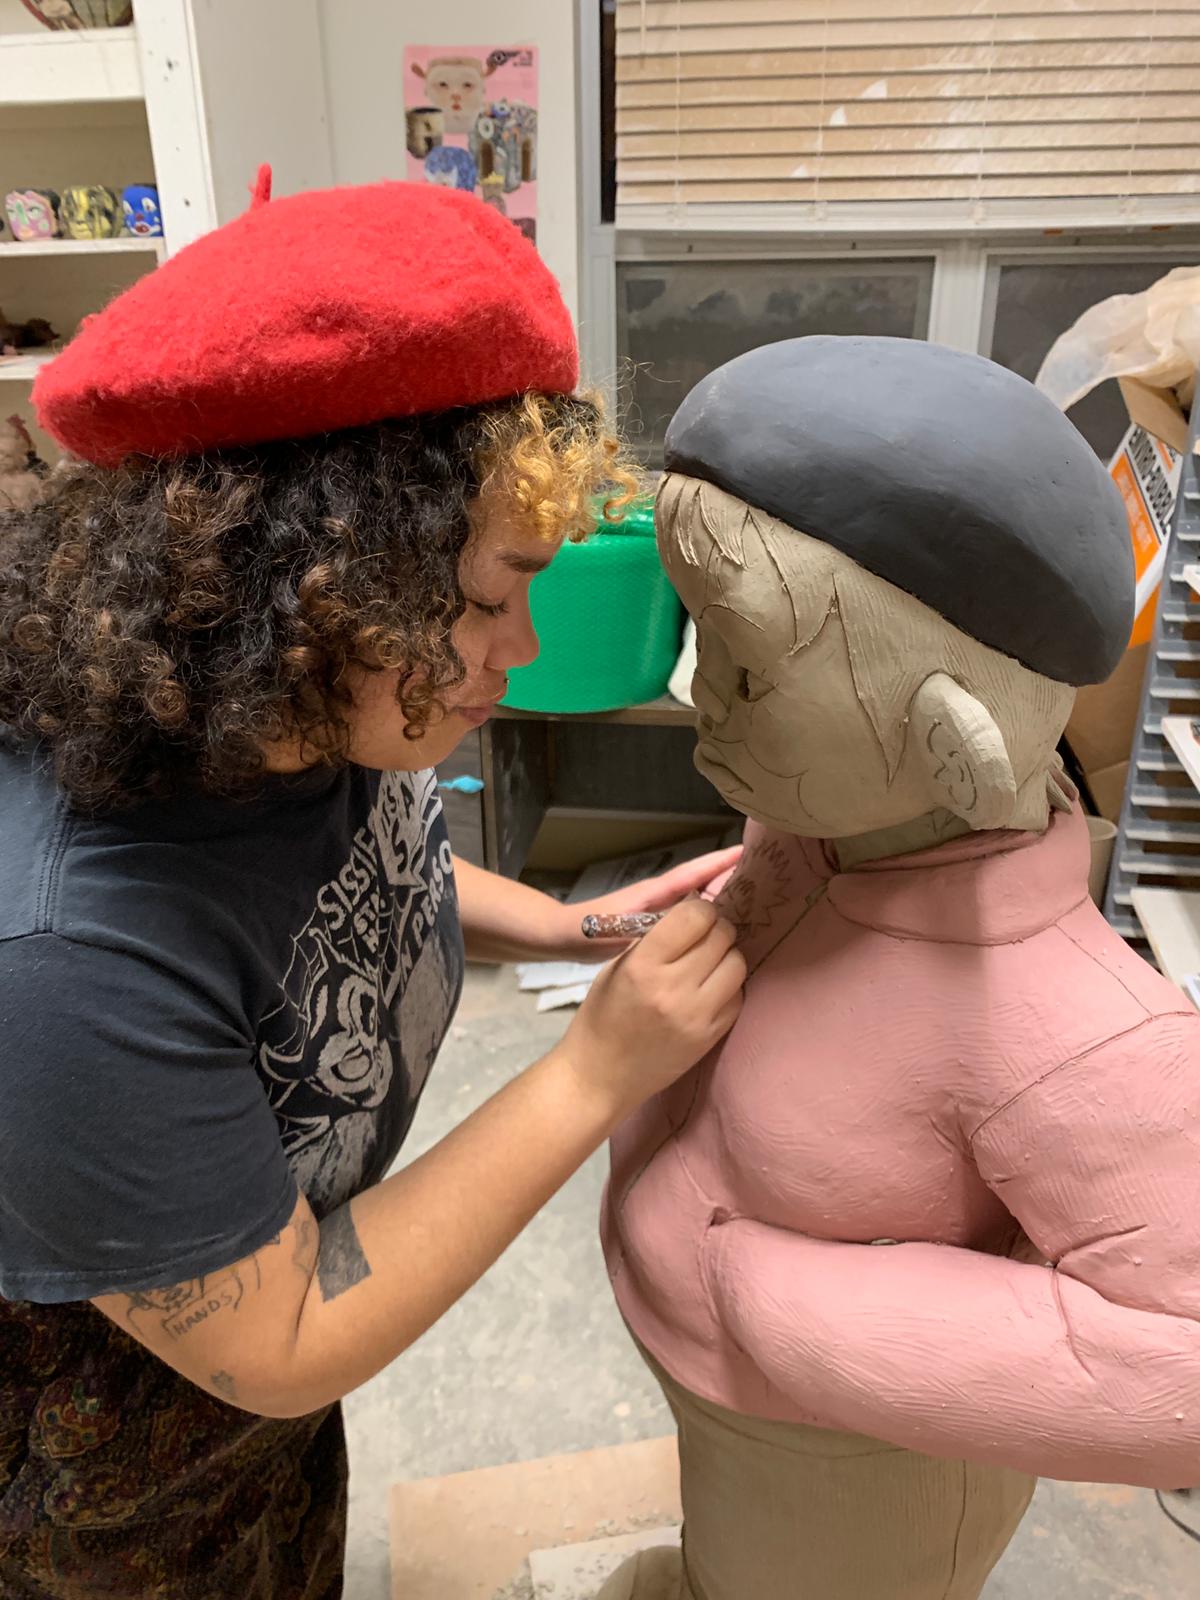 Sydnie Jimenez carving into a large-scale figure. The figure wears a pink jacket and a black hat. Jimenez is swearing a black t-shirt and a red beret.